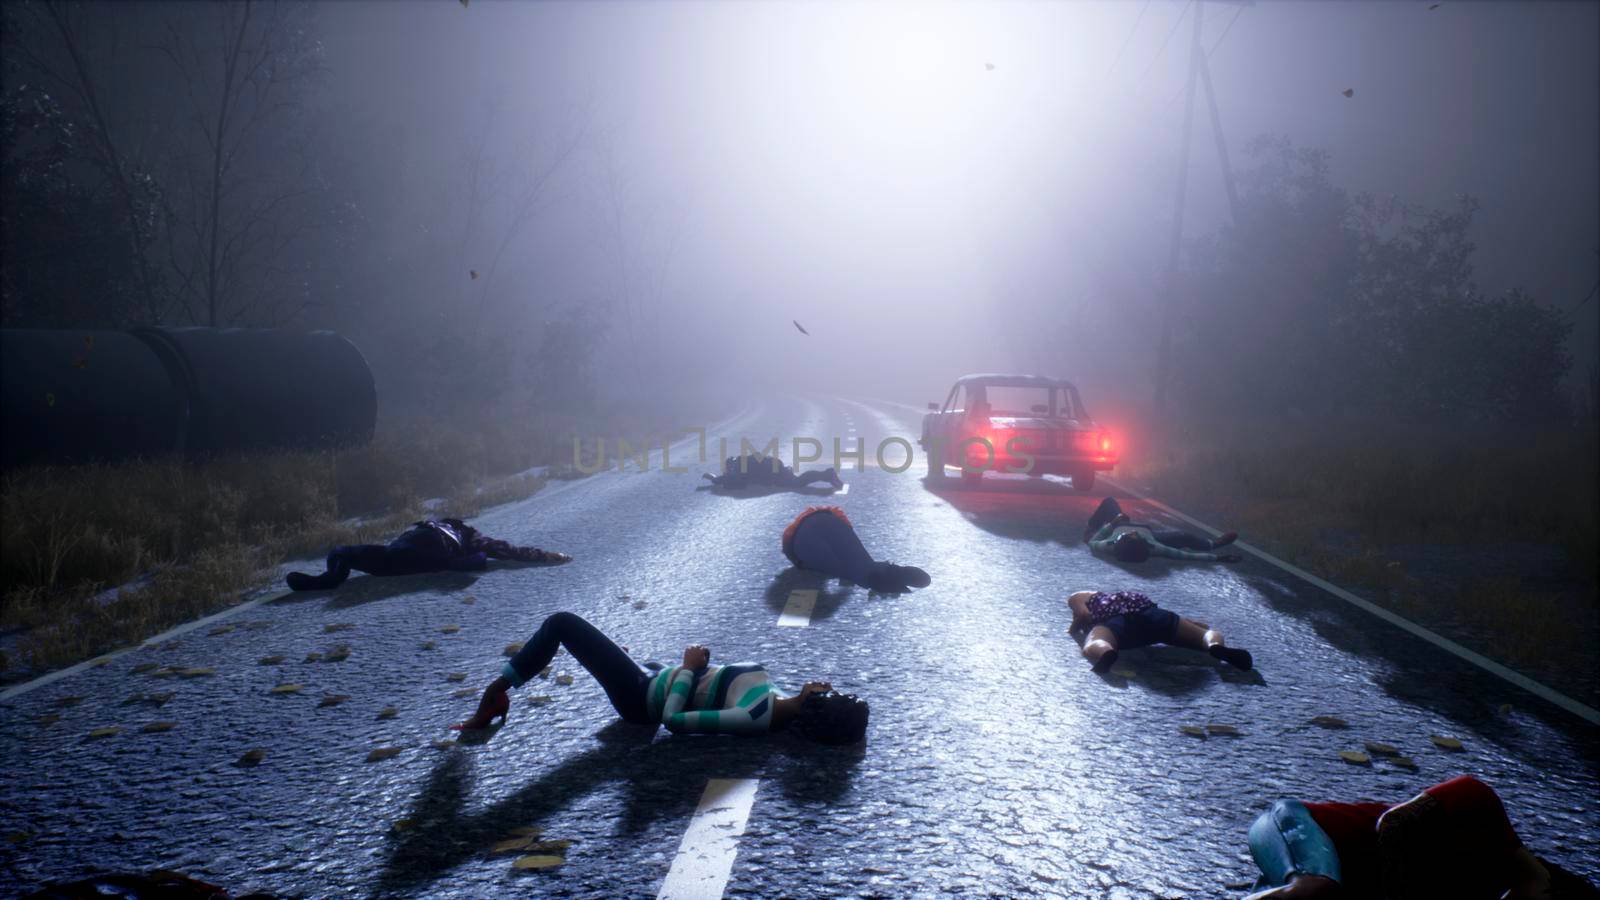 People suddenly fall and lose consciousness from a new epidemic or some kind of external influence, on a foggy mystical road. View of an abandoned apocalyptic foggy road.